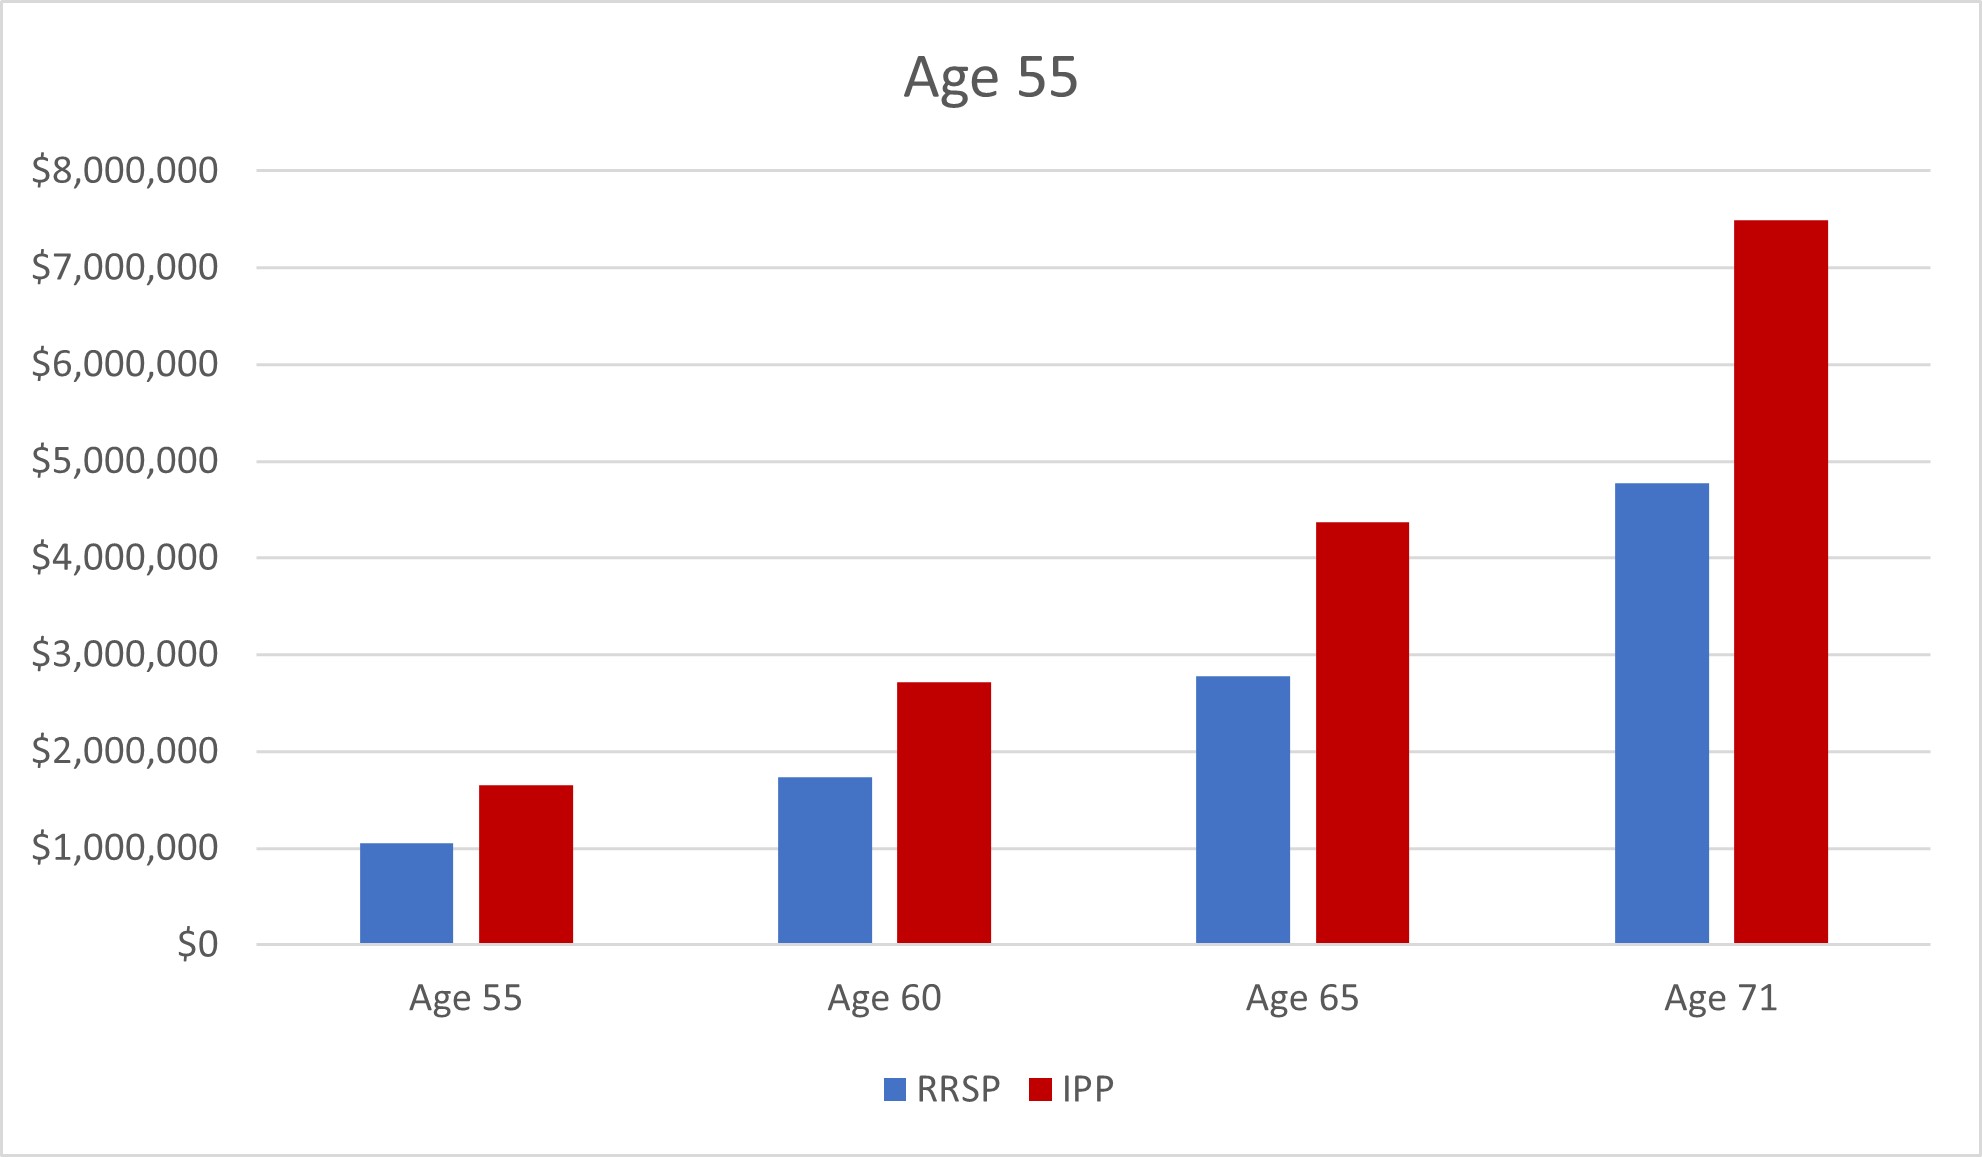 Bar graph showing accumulating funds in RRSP vs IPP starting at age 55.